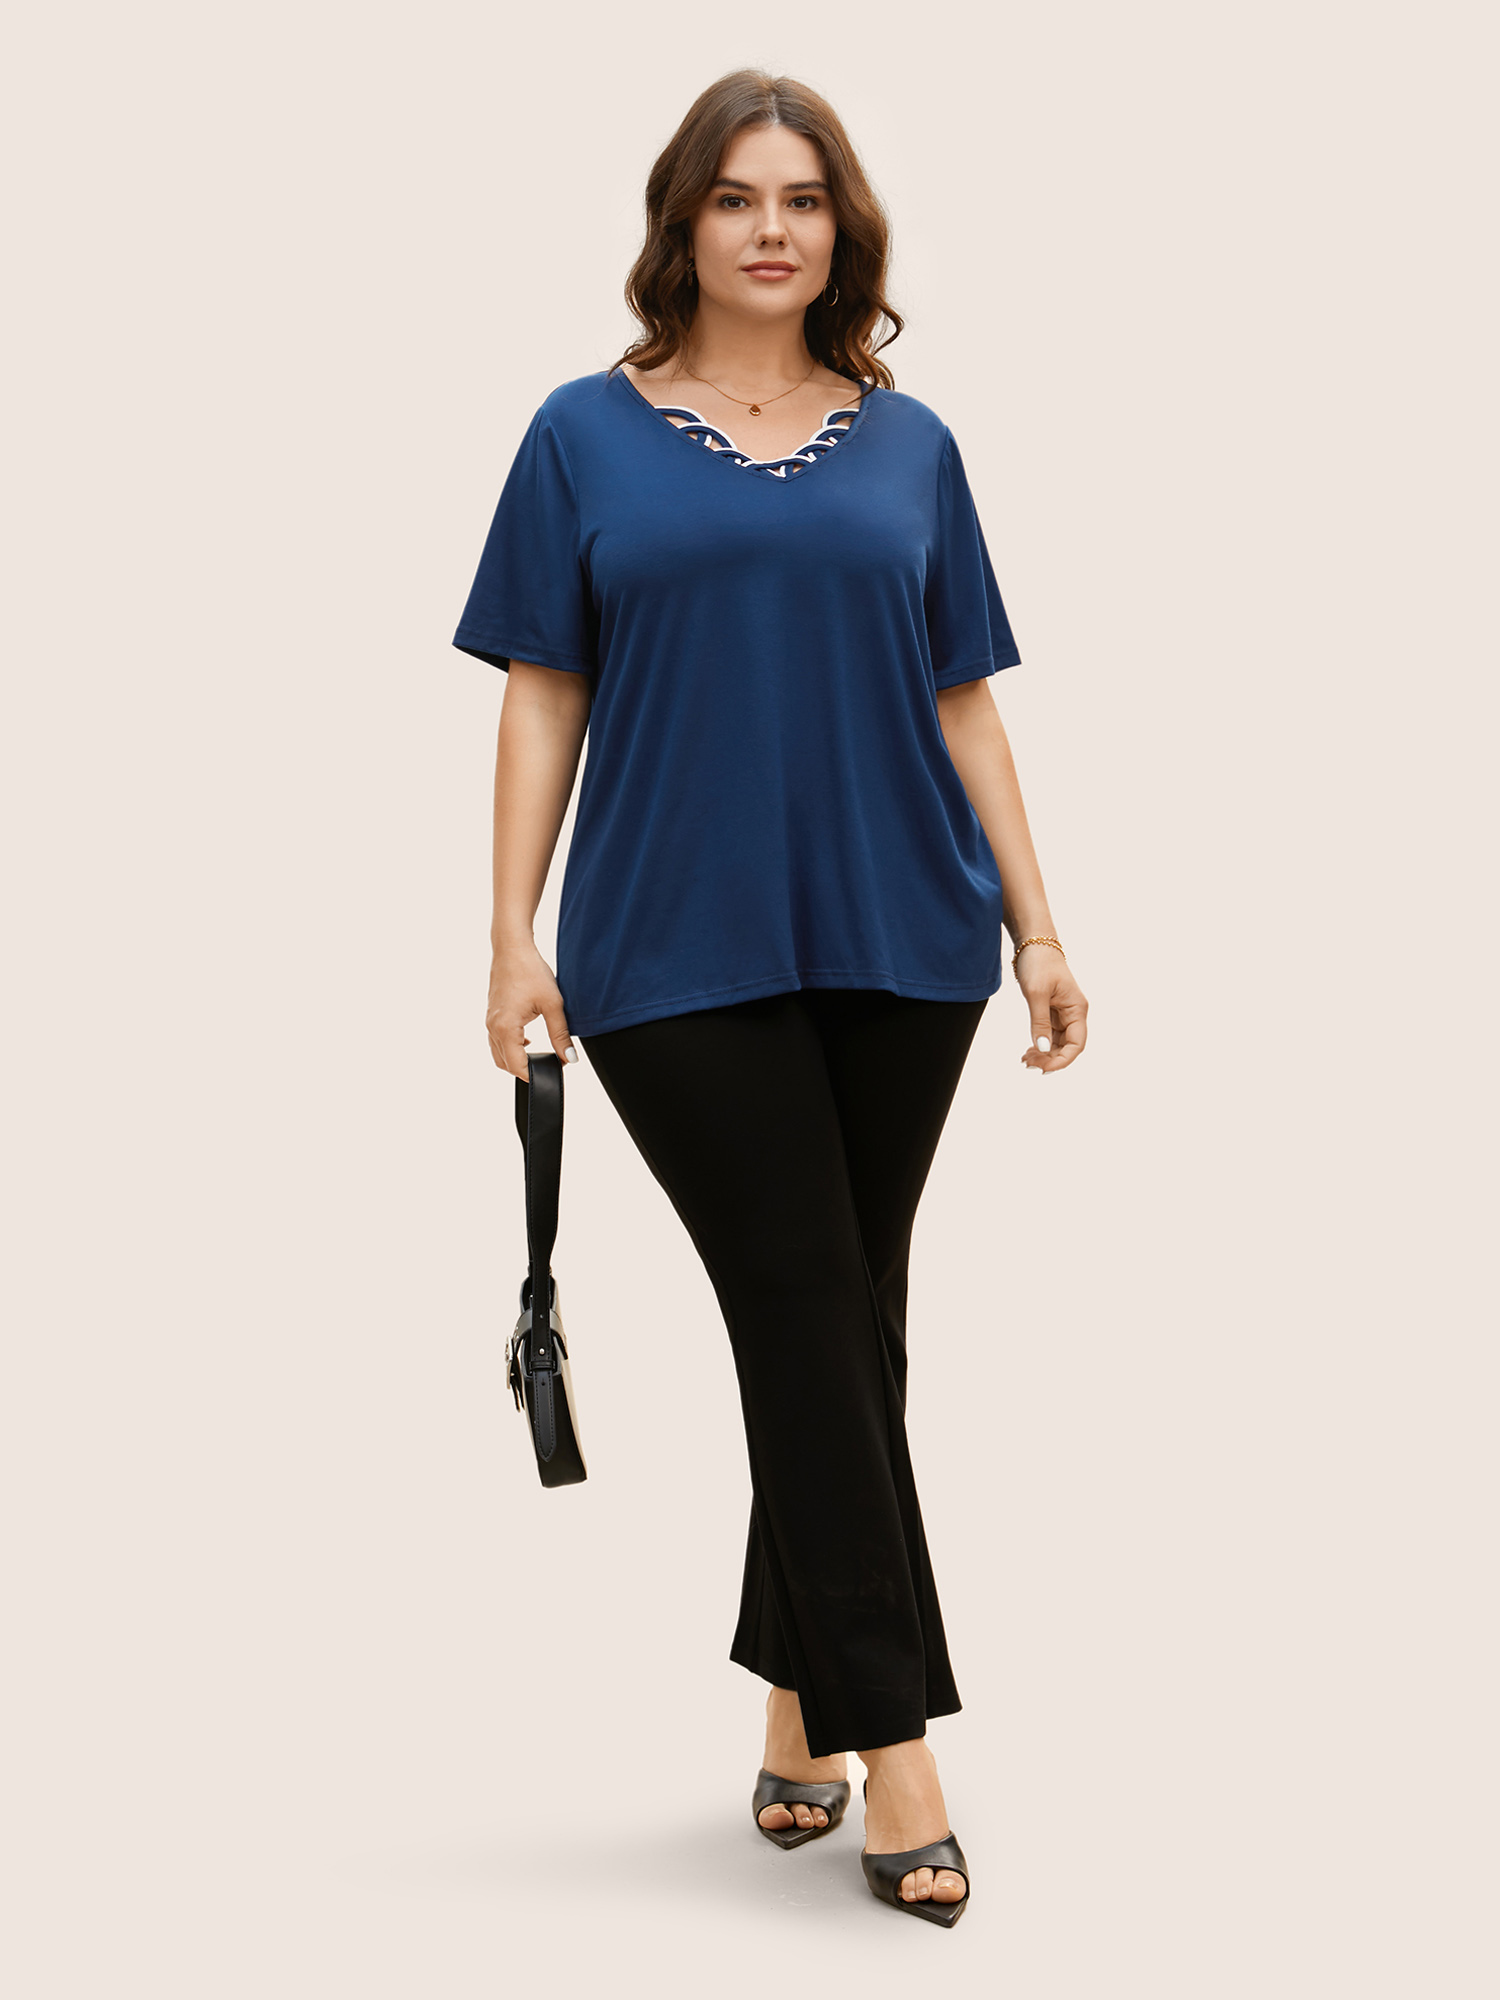 

Plus Size V Neck Solid Color Scalloped Trim T-shirt DarkBlue Women At the Office Contrast V-neck Work T-shirts BloomChic